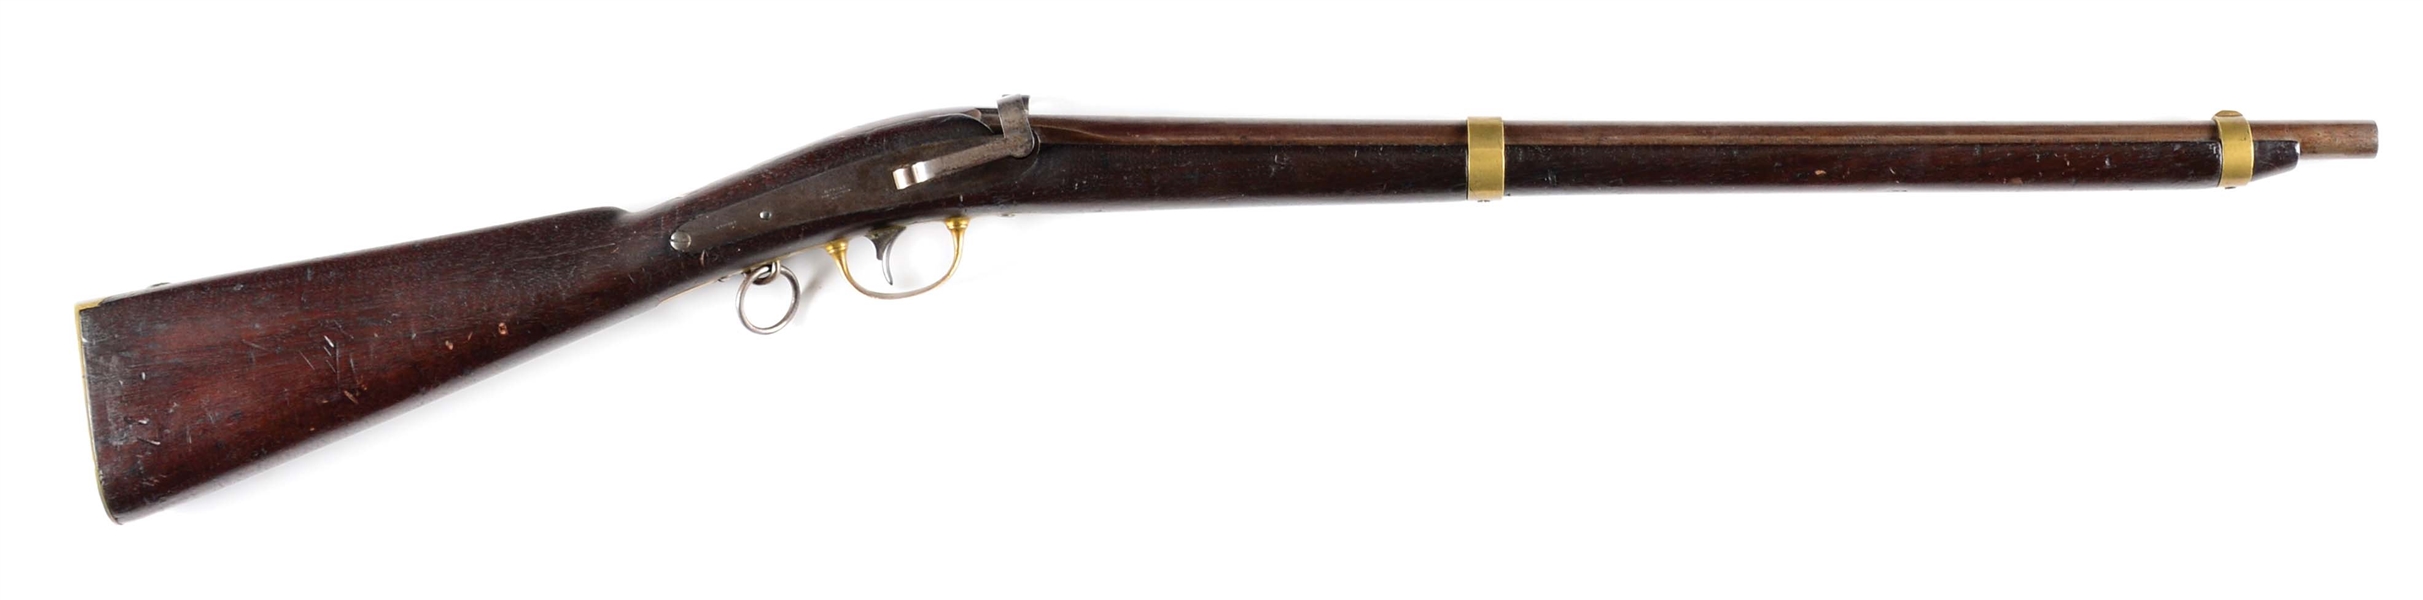 (A) JENKS MODEL 1841 NAVY PERCUSSION CARBINE DATED 1845.